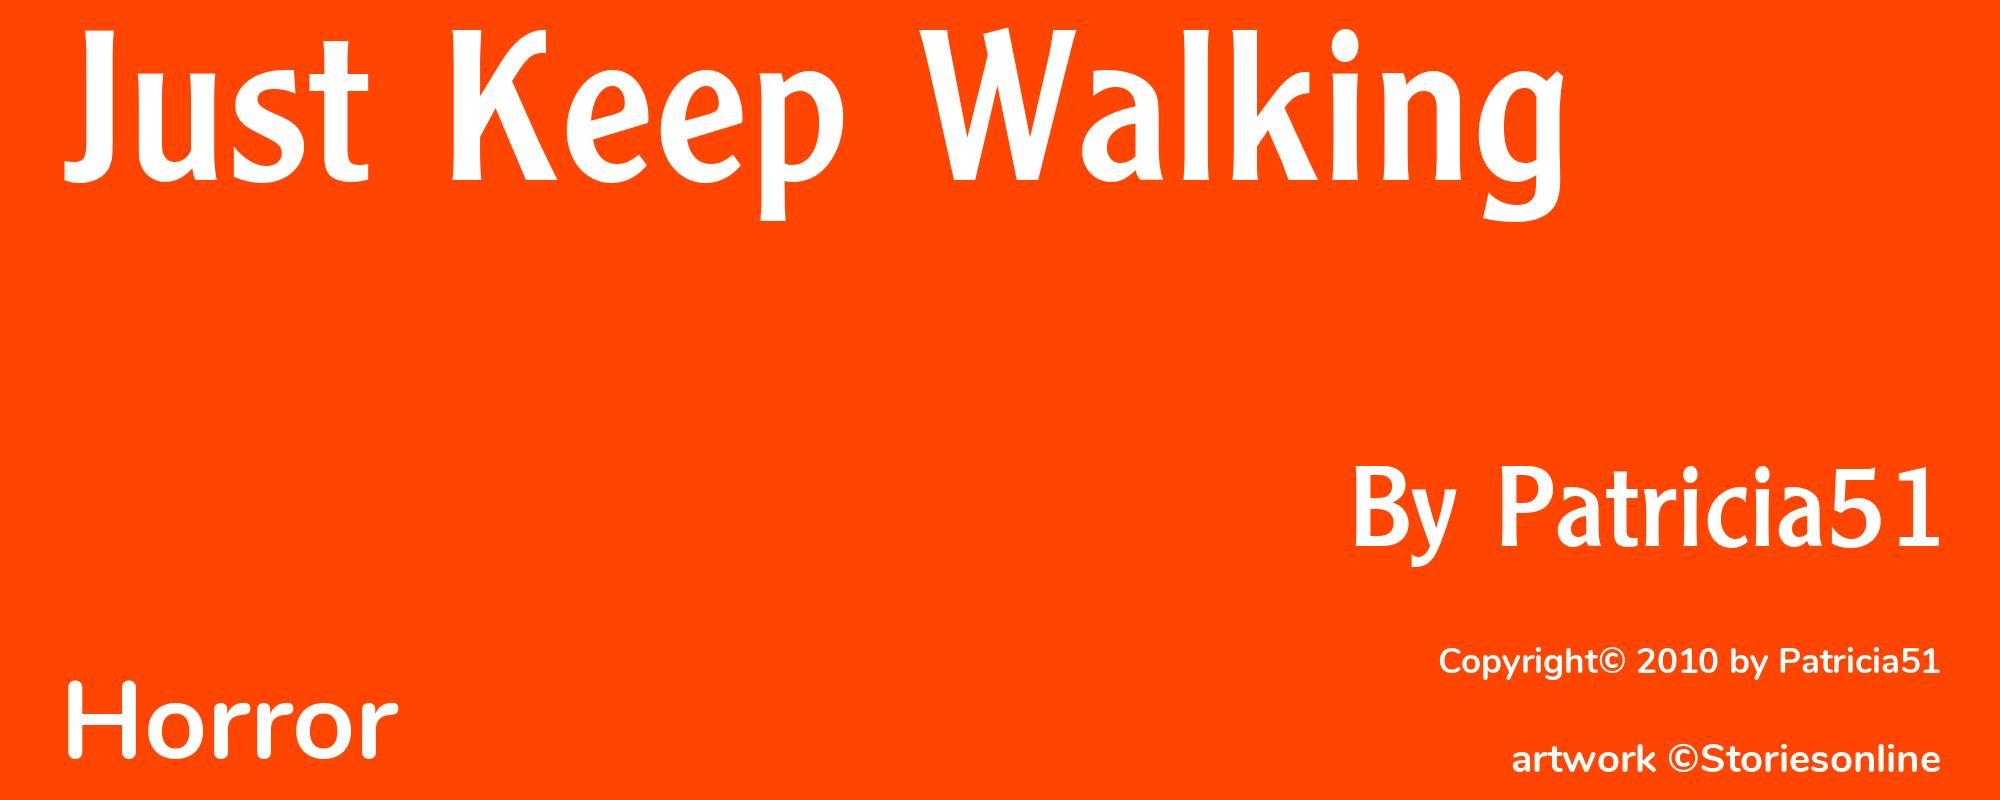 Just Keep Walking - Cover